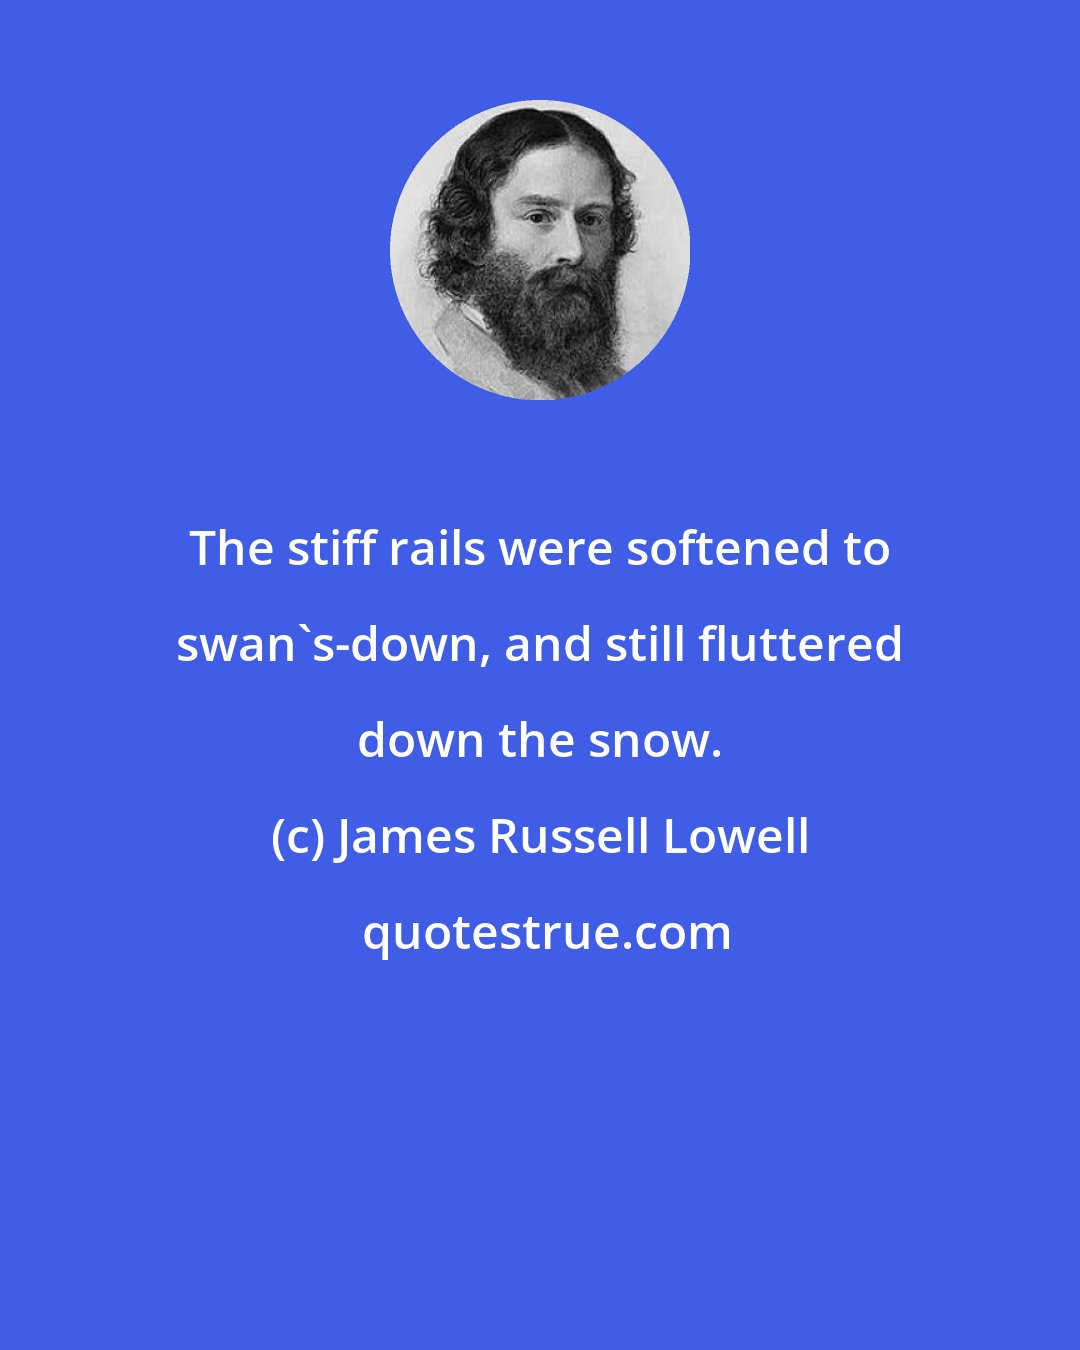 James Russell Lowell: The stiff rails were softened to swan's-down, and still fluttered down the snow.